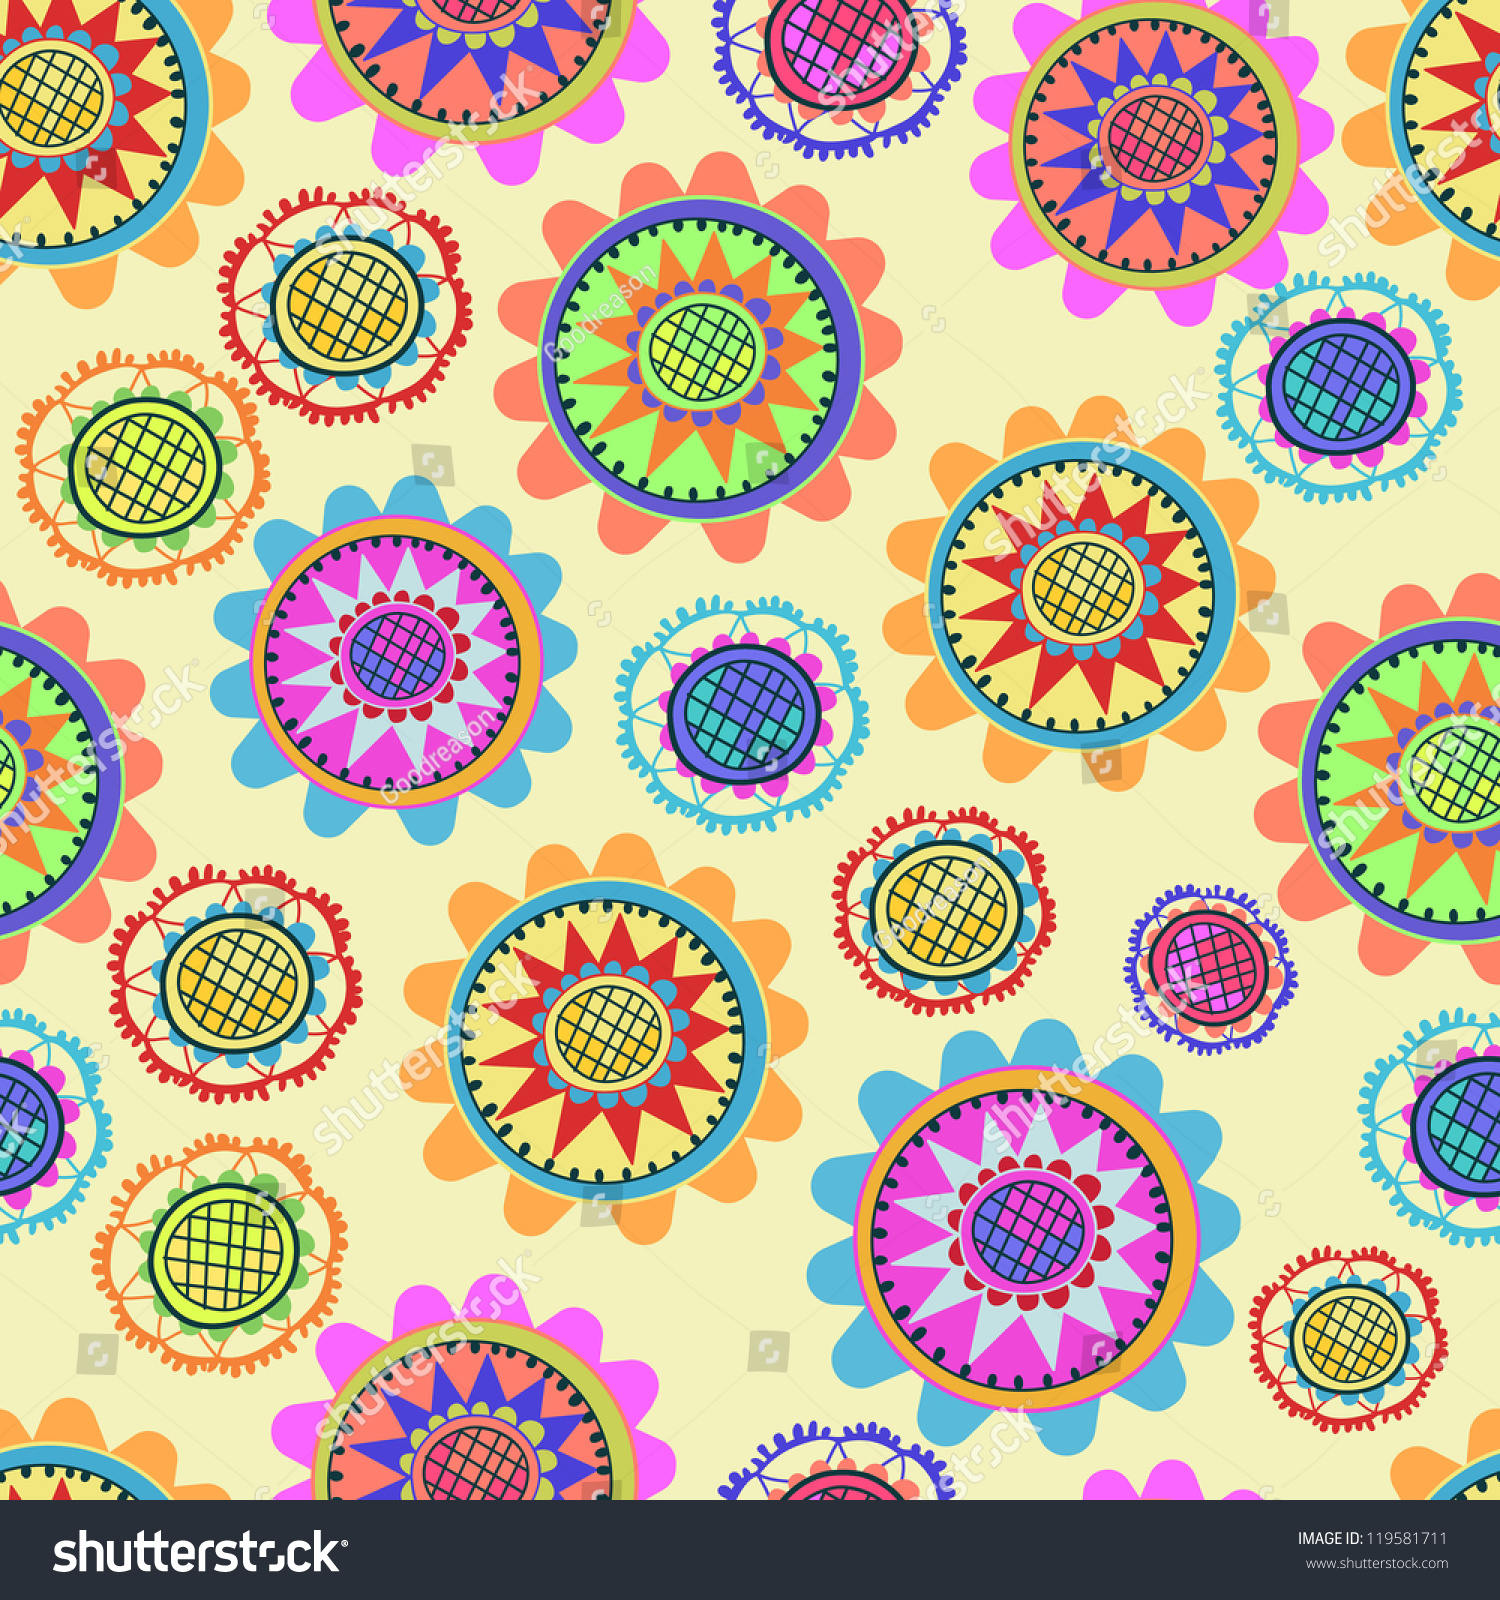 Seamless Texture With Hand Drawn Decorative Flowers Stock Vector ...